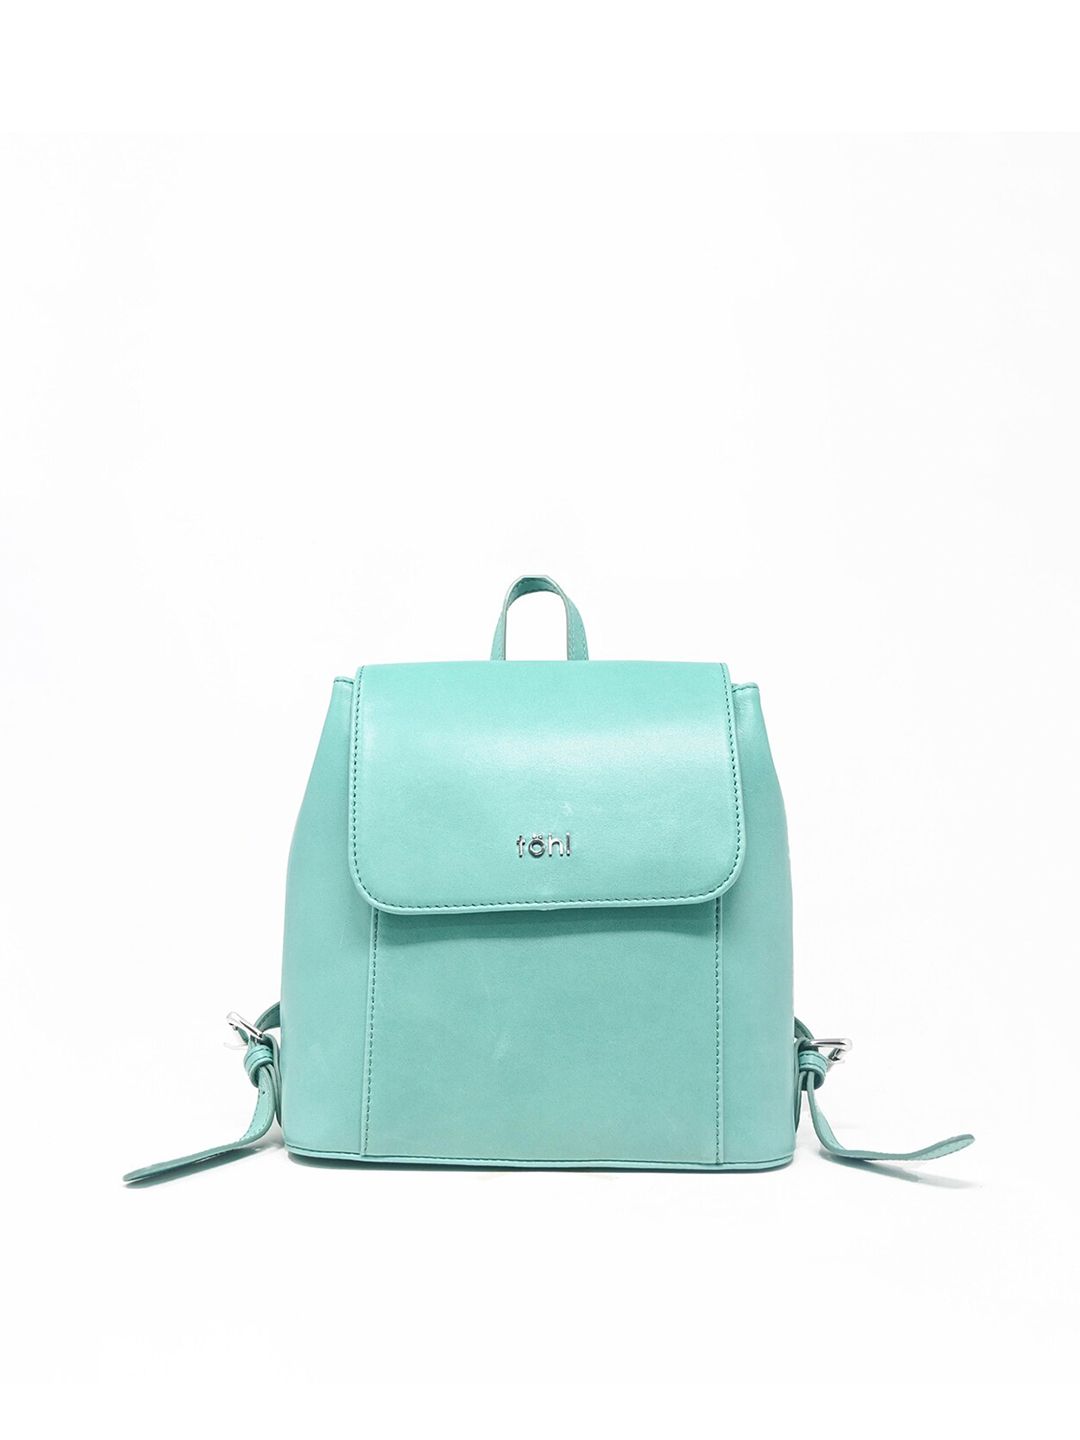 tohl Women Turquoise Blue & White Leather Backpack Price in India